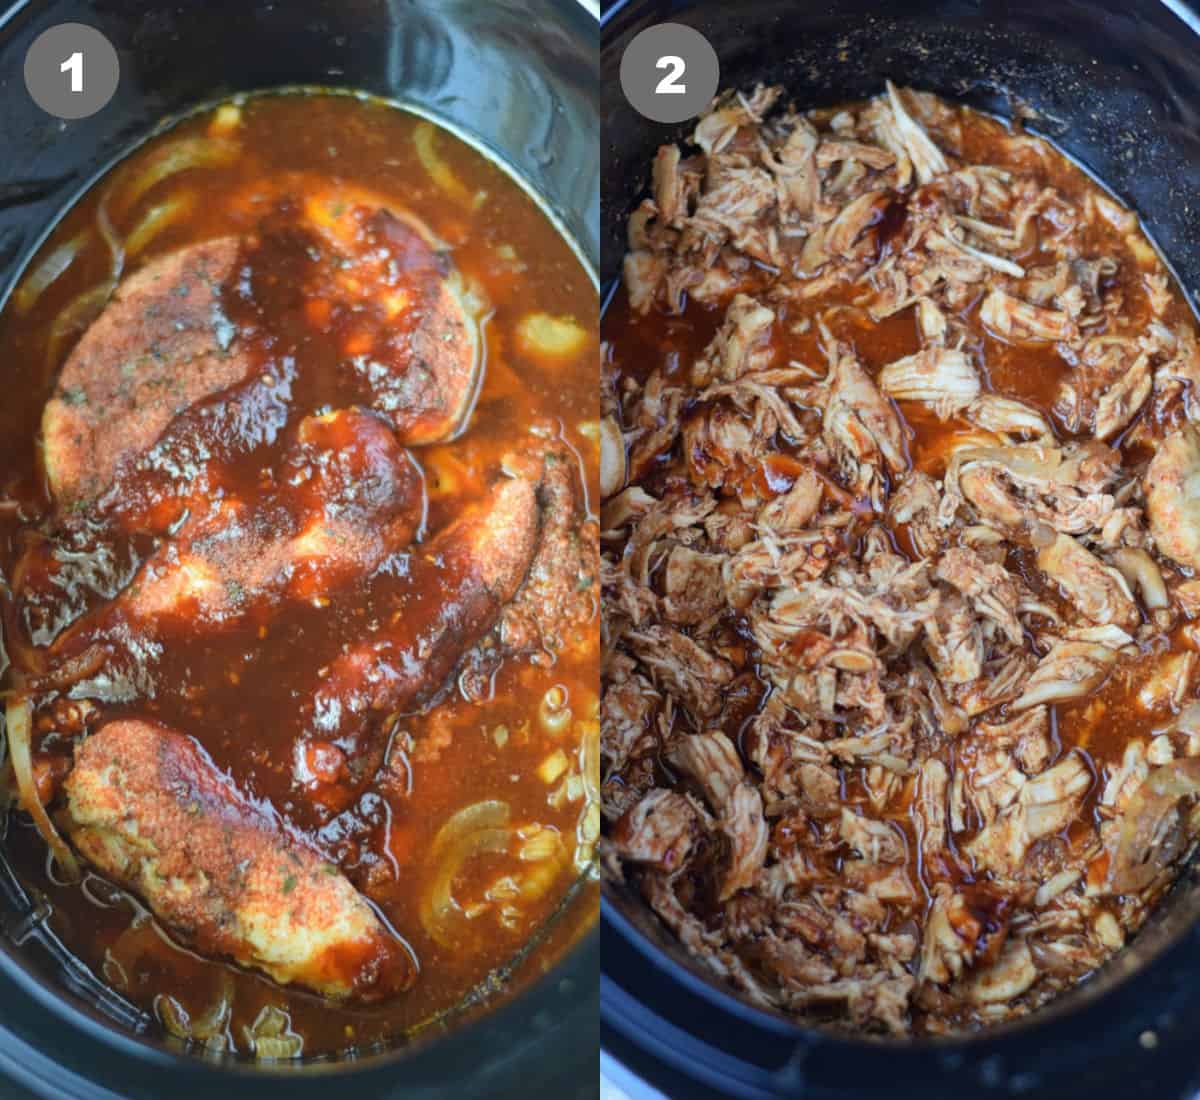 Raw chicken in bbq sauce then shredded in a slow cooker.